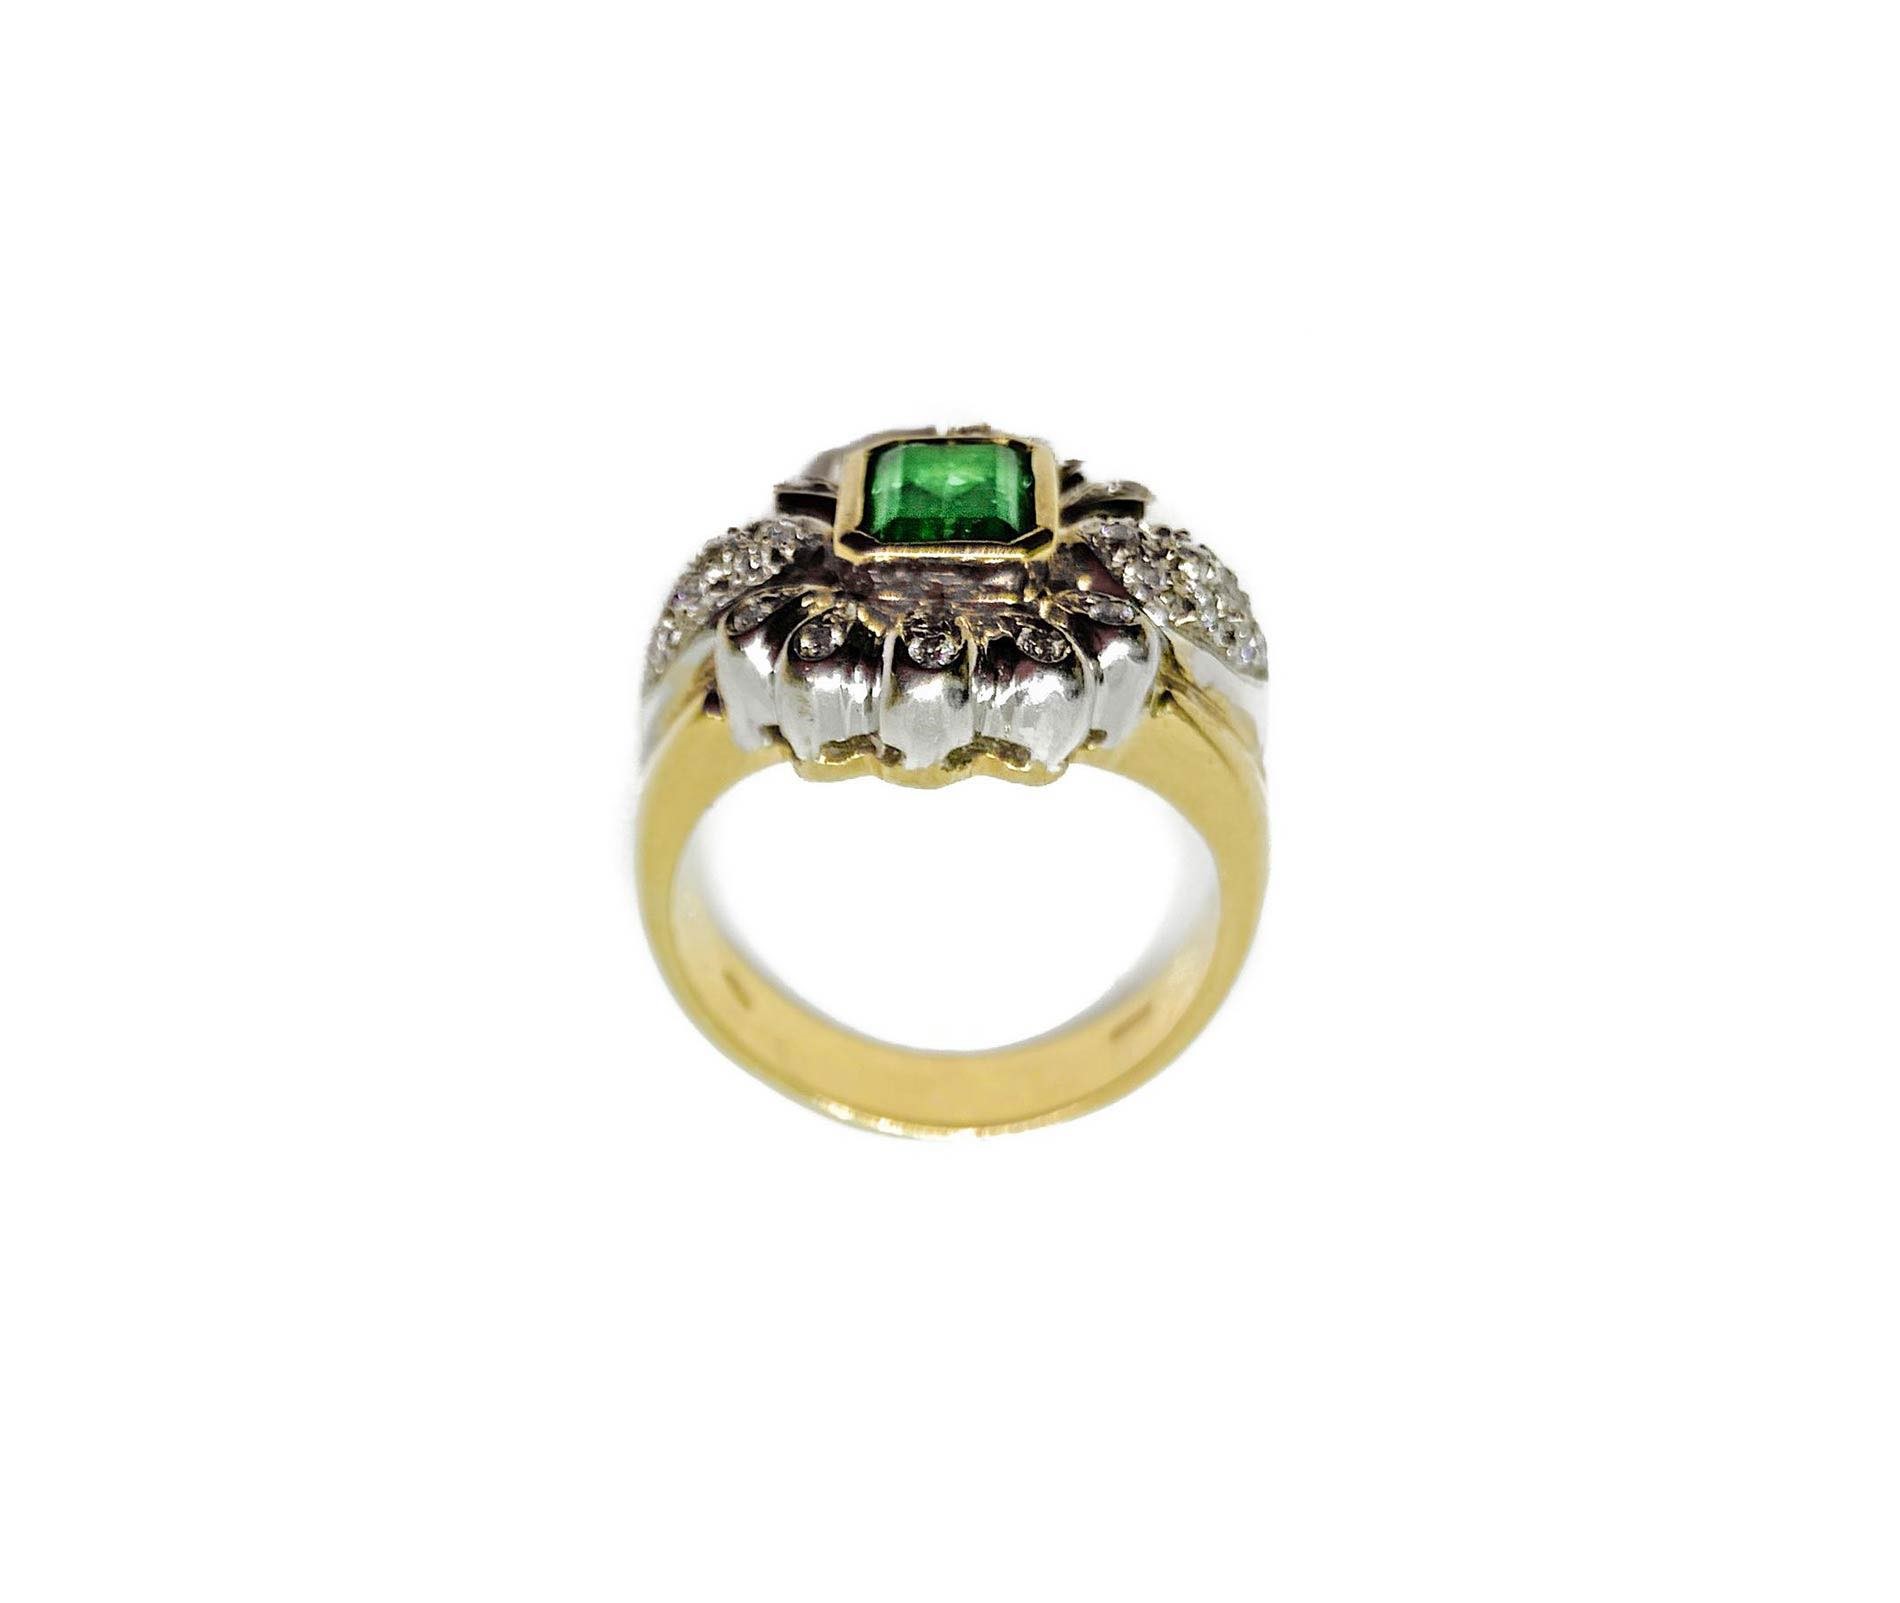 Ring in yellow gold, diamonds and emeralds - Image 5 of 6